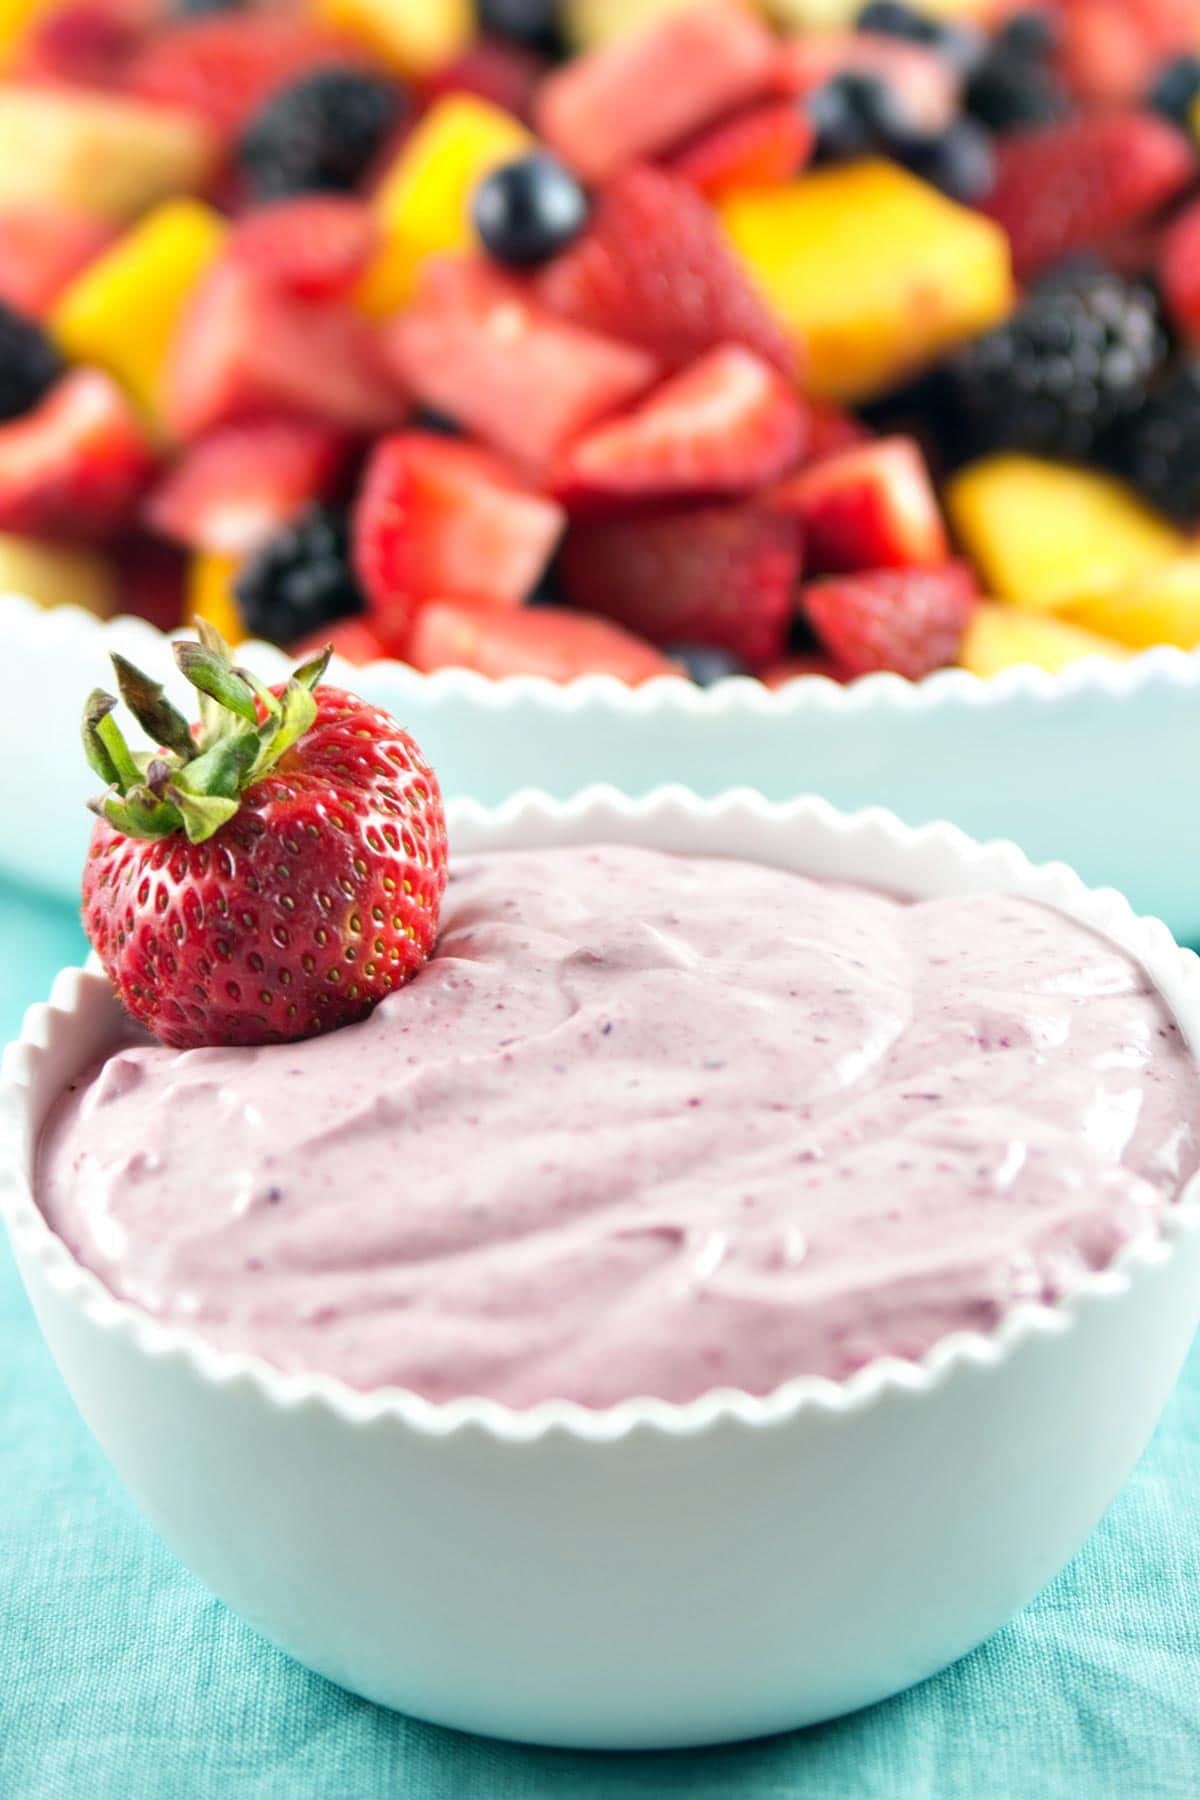 Marshmallow Fruit Dip made with homemade marshmallow fluff and pureed berries. {Bunsen Burner Bakery}